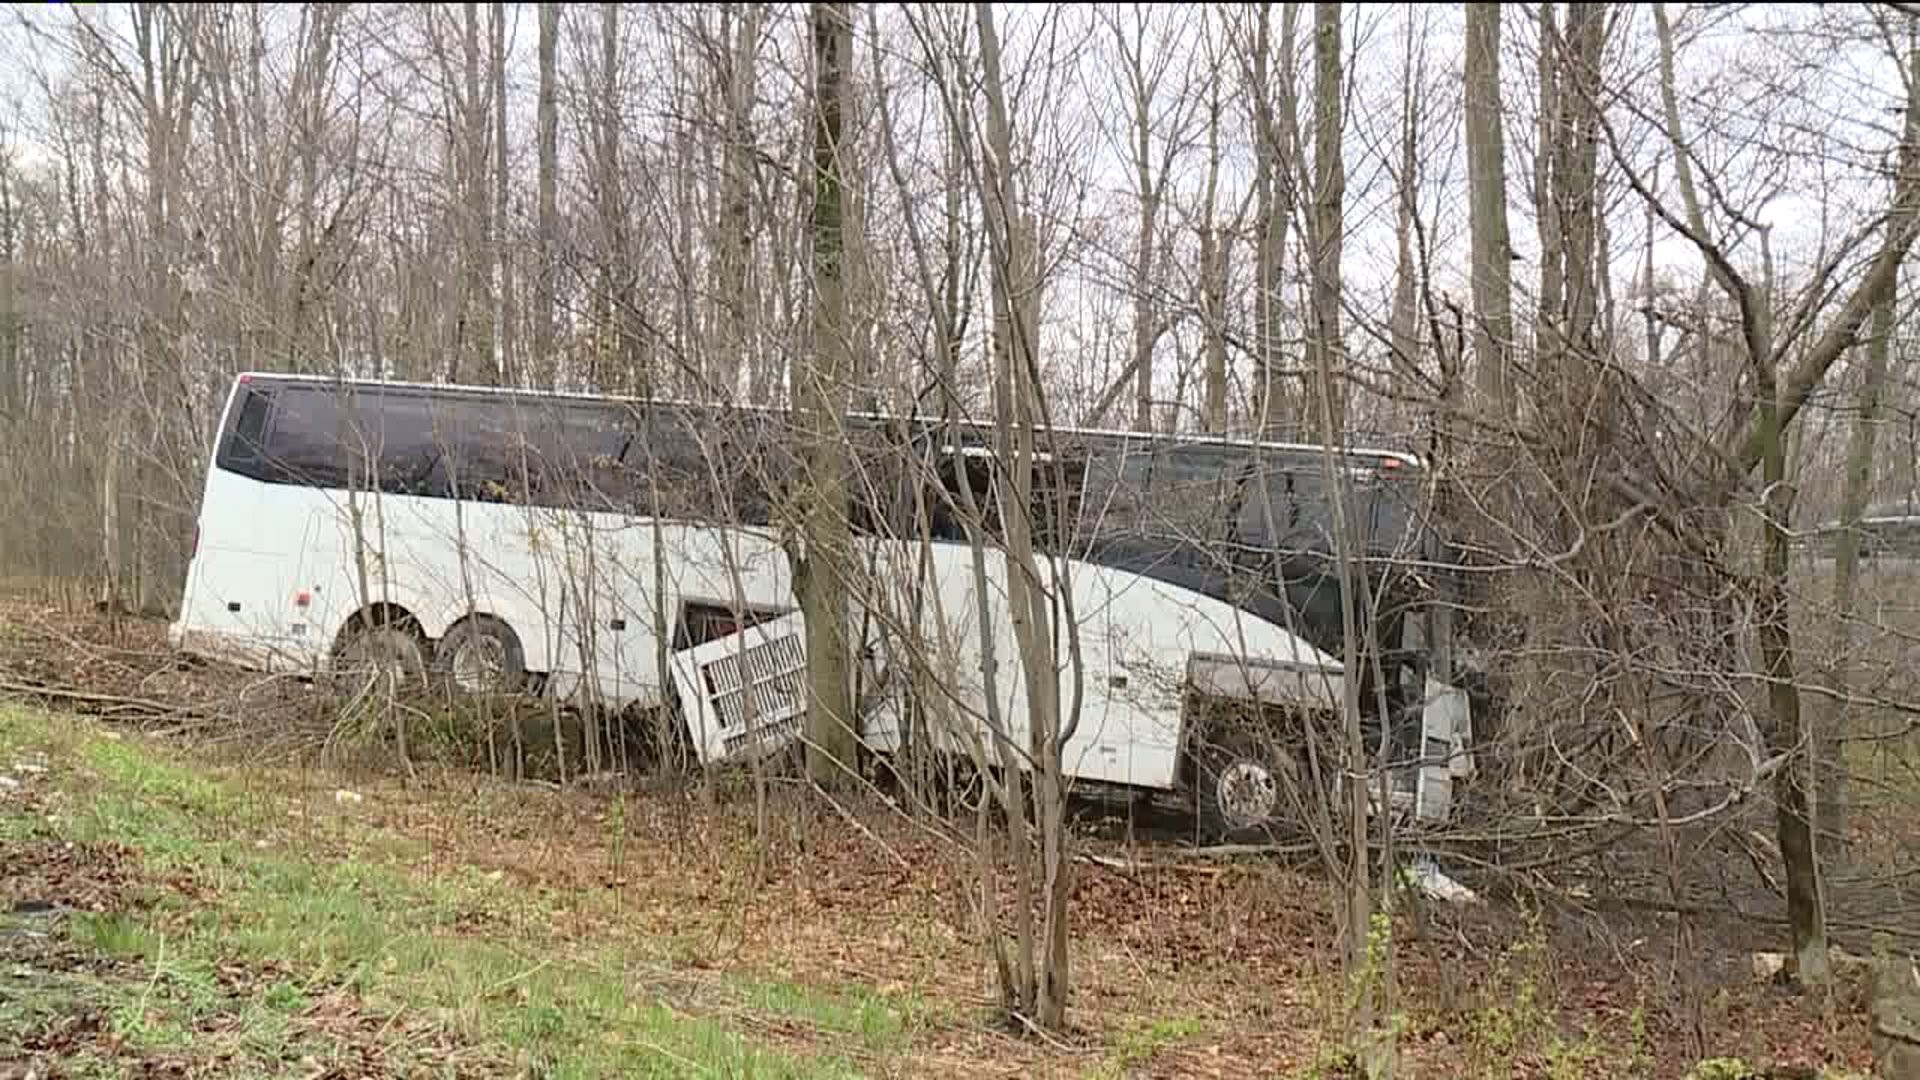 Bus, Tractor-Trailer Collide on I-380